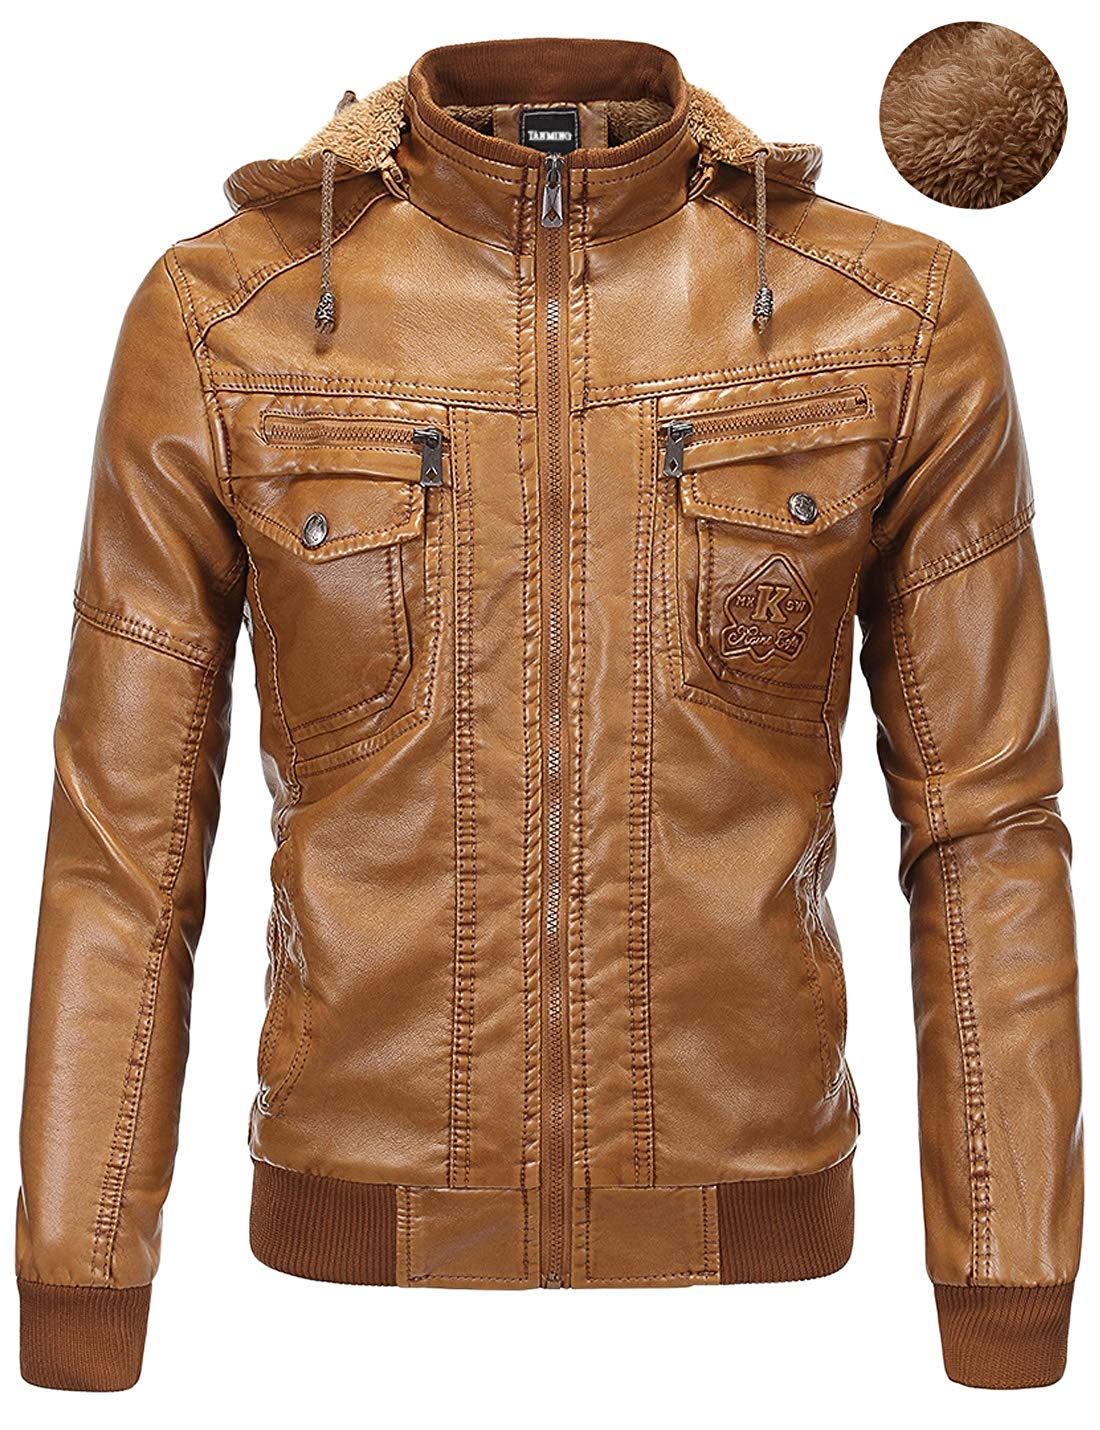 Tanming Men's Plus Velvet Motorcycle Pu Faux Leather Jacket with Removable Fur Hood